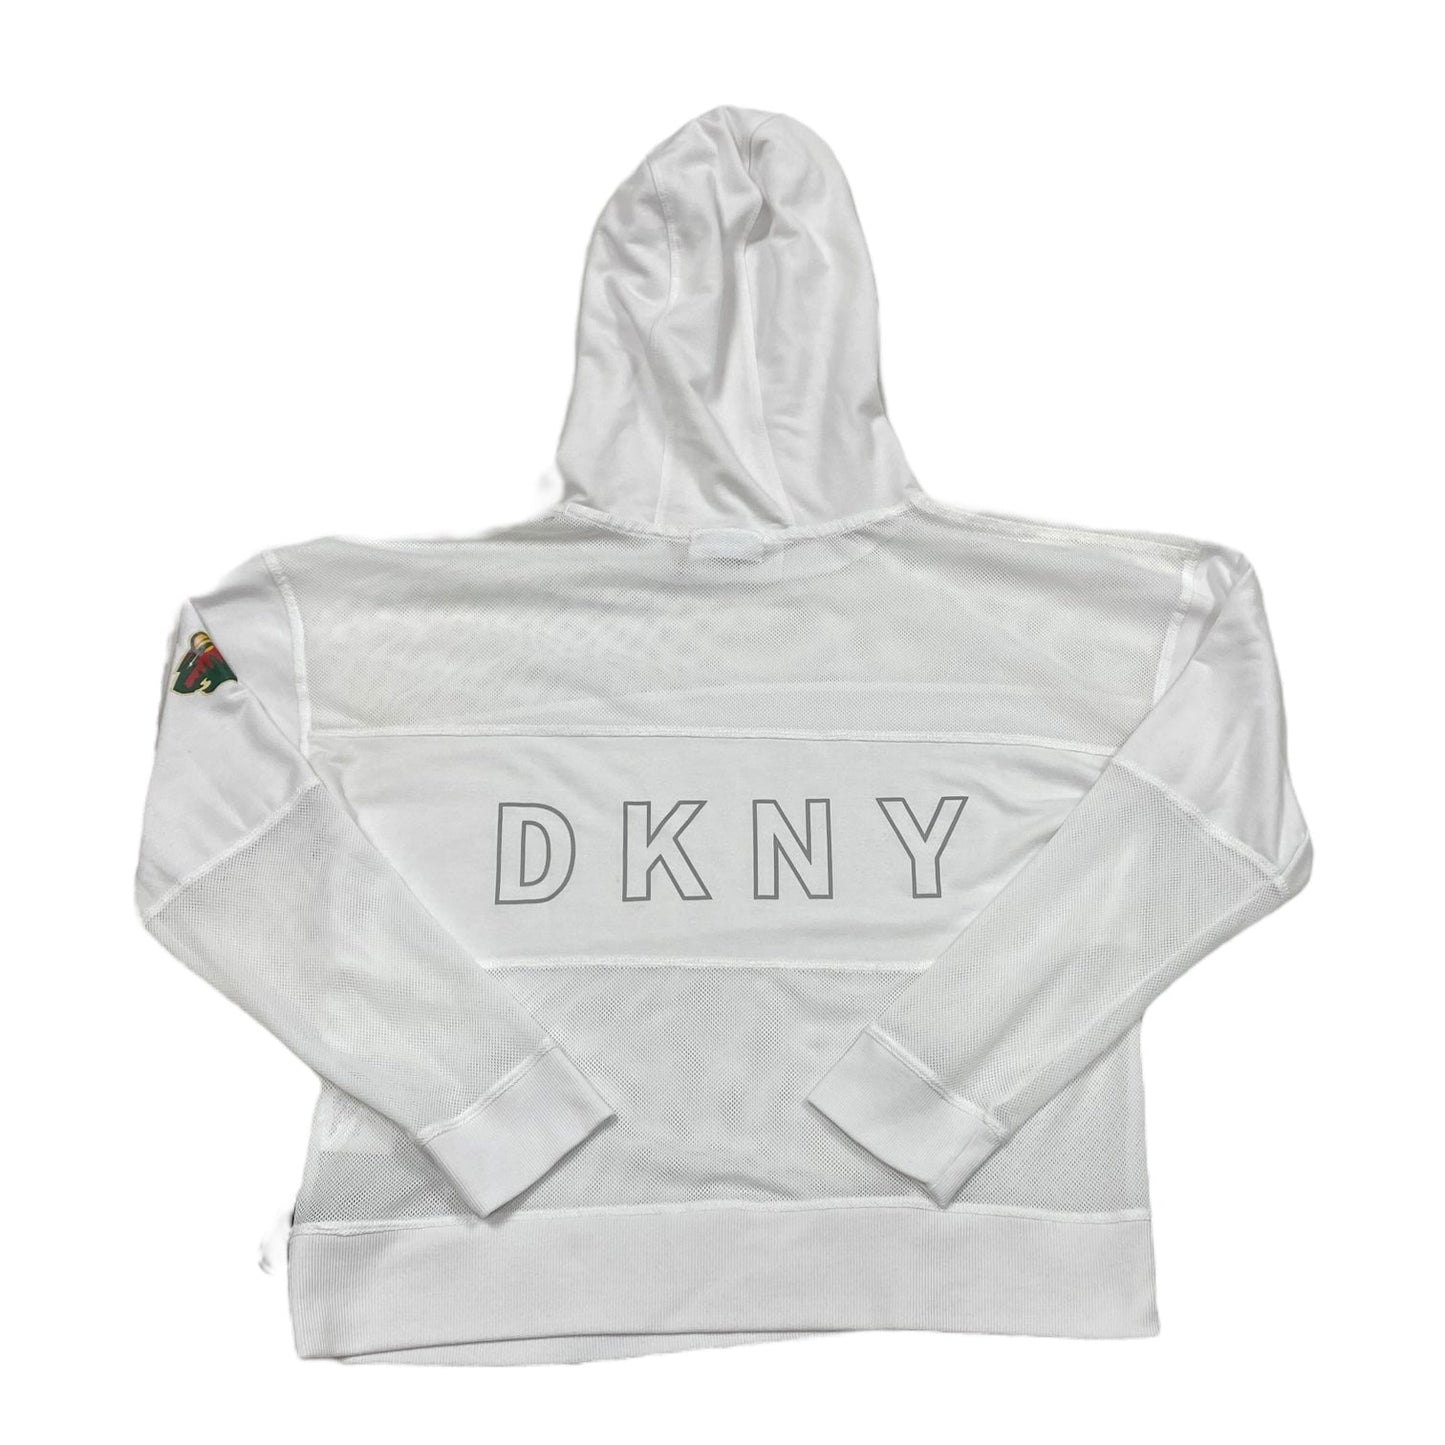 White Athletic Top Long Sleeve Hoodie Dkny, Size M